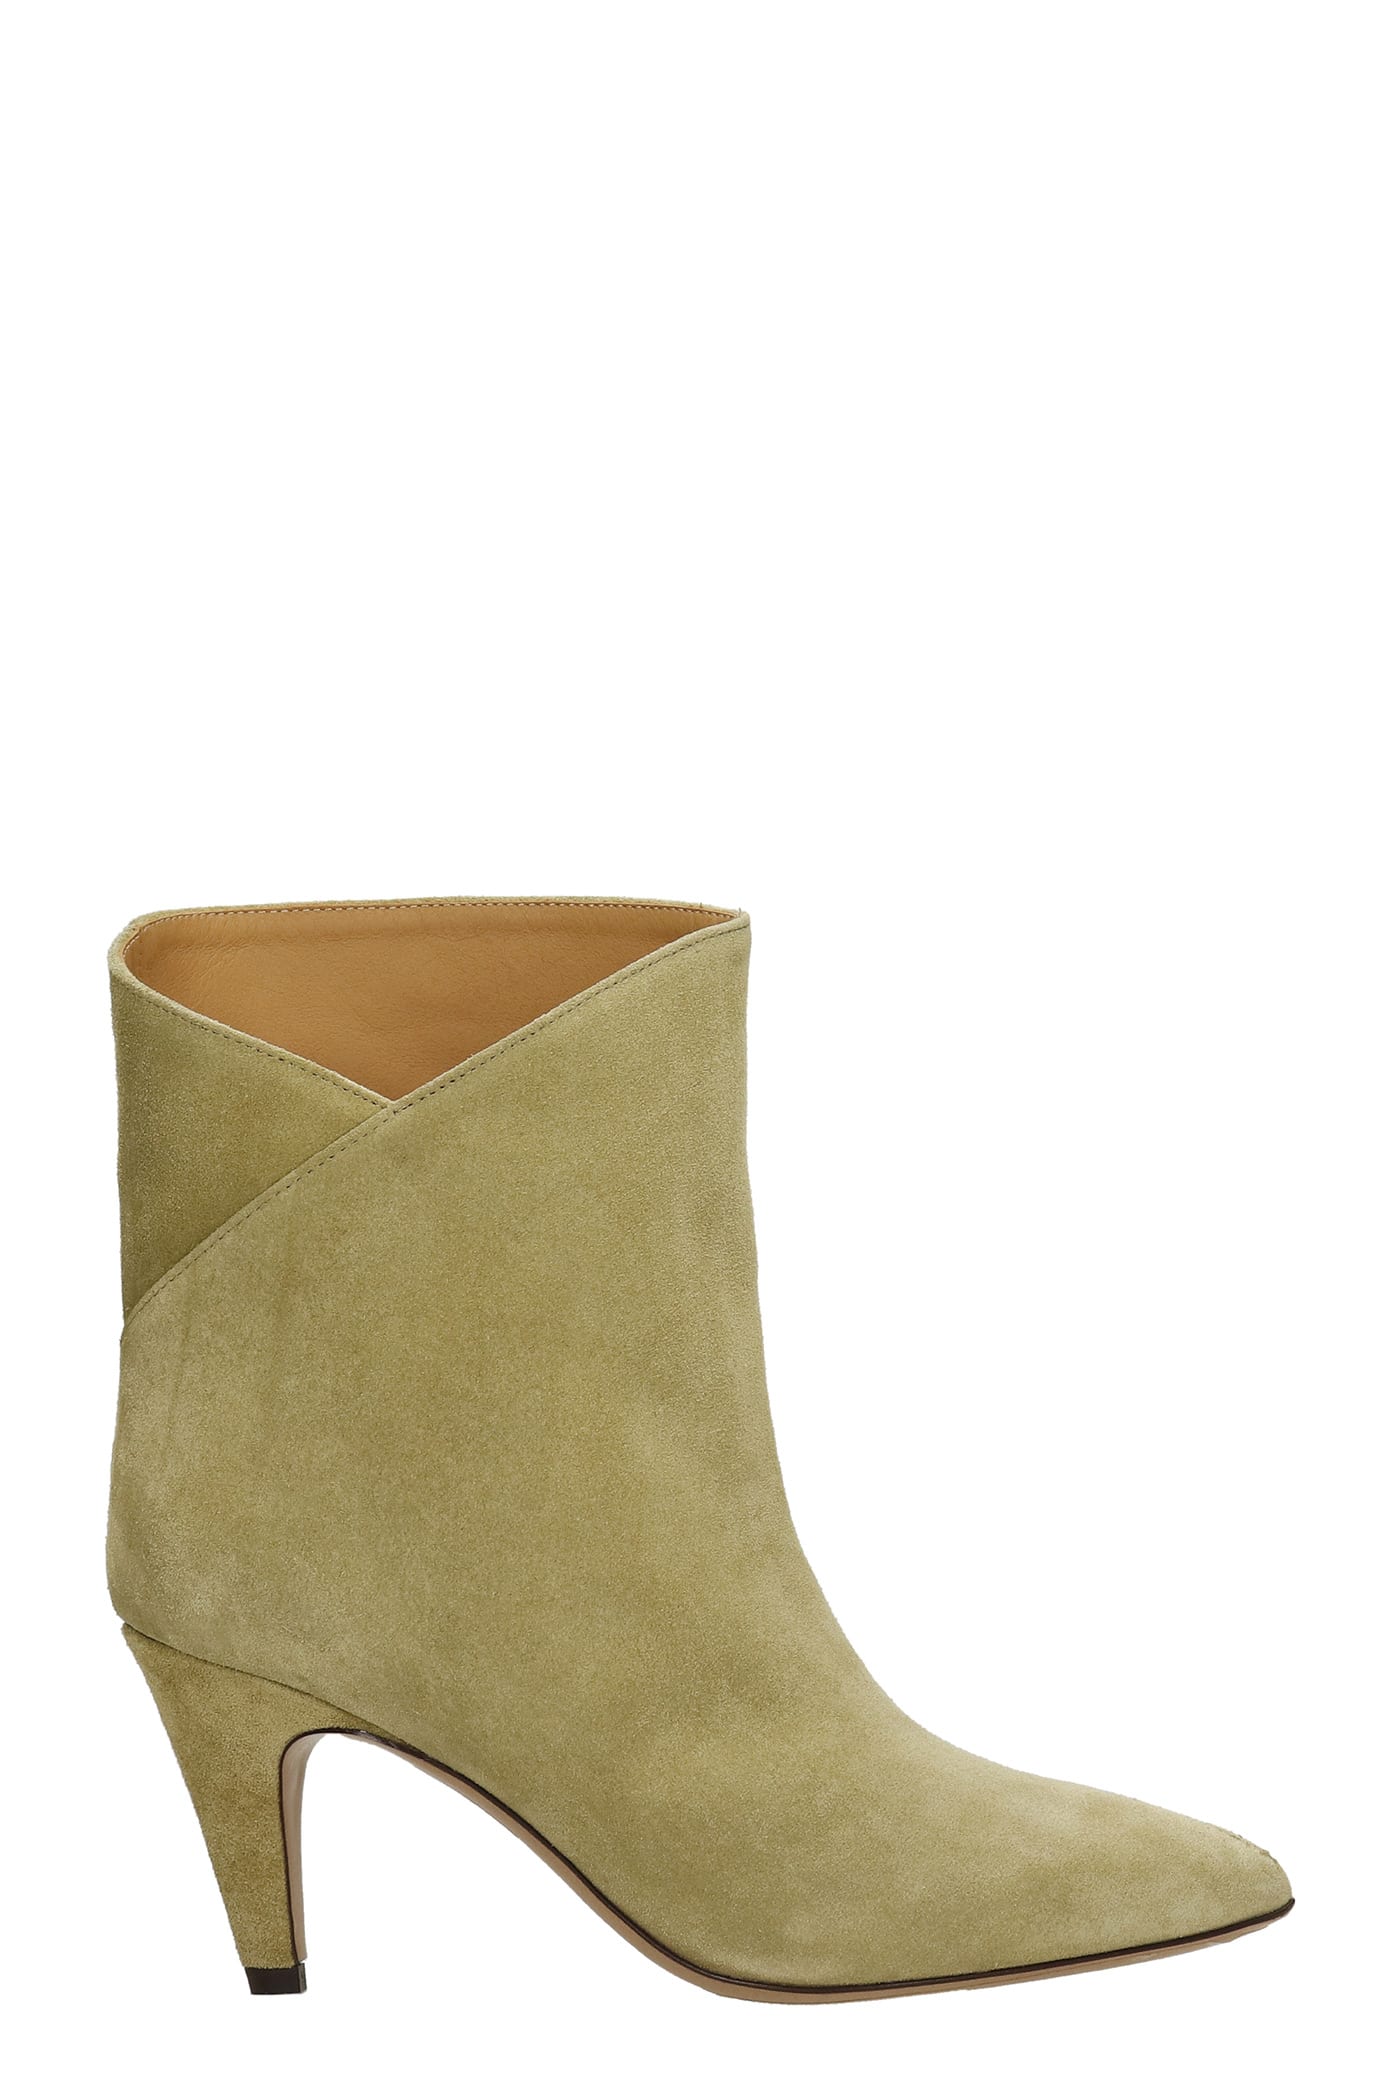 Isabel Marant Delf High Heels Ankle Boots In Beige Suede